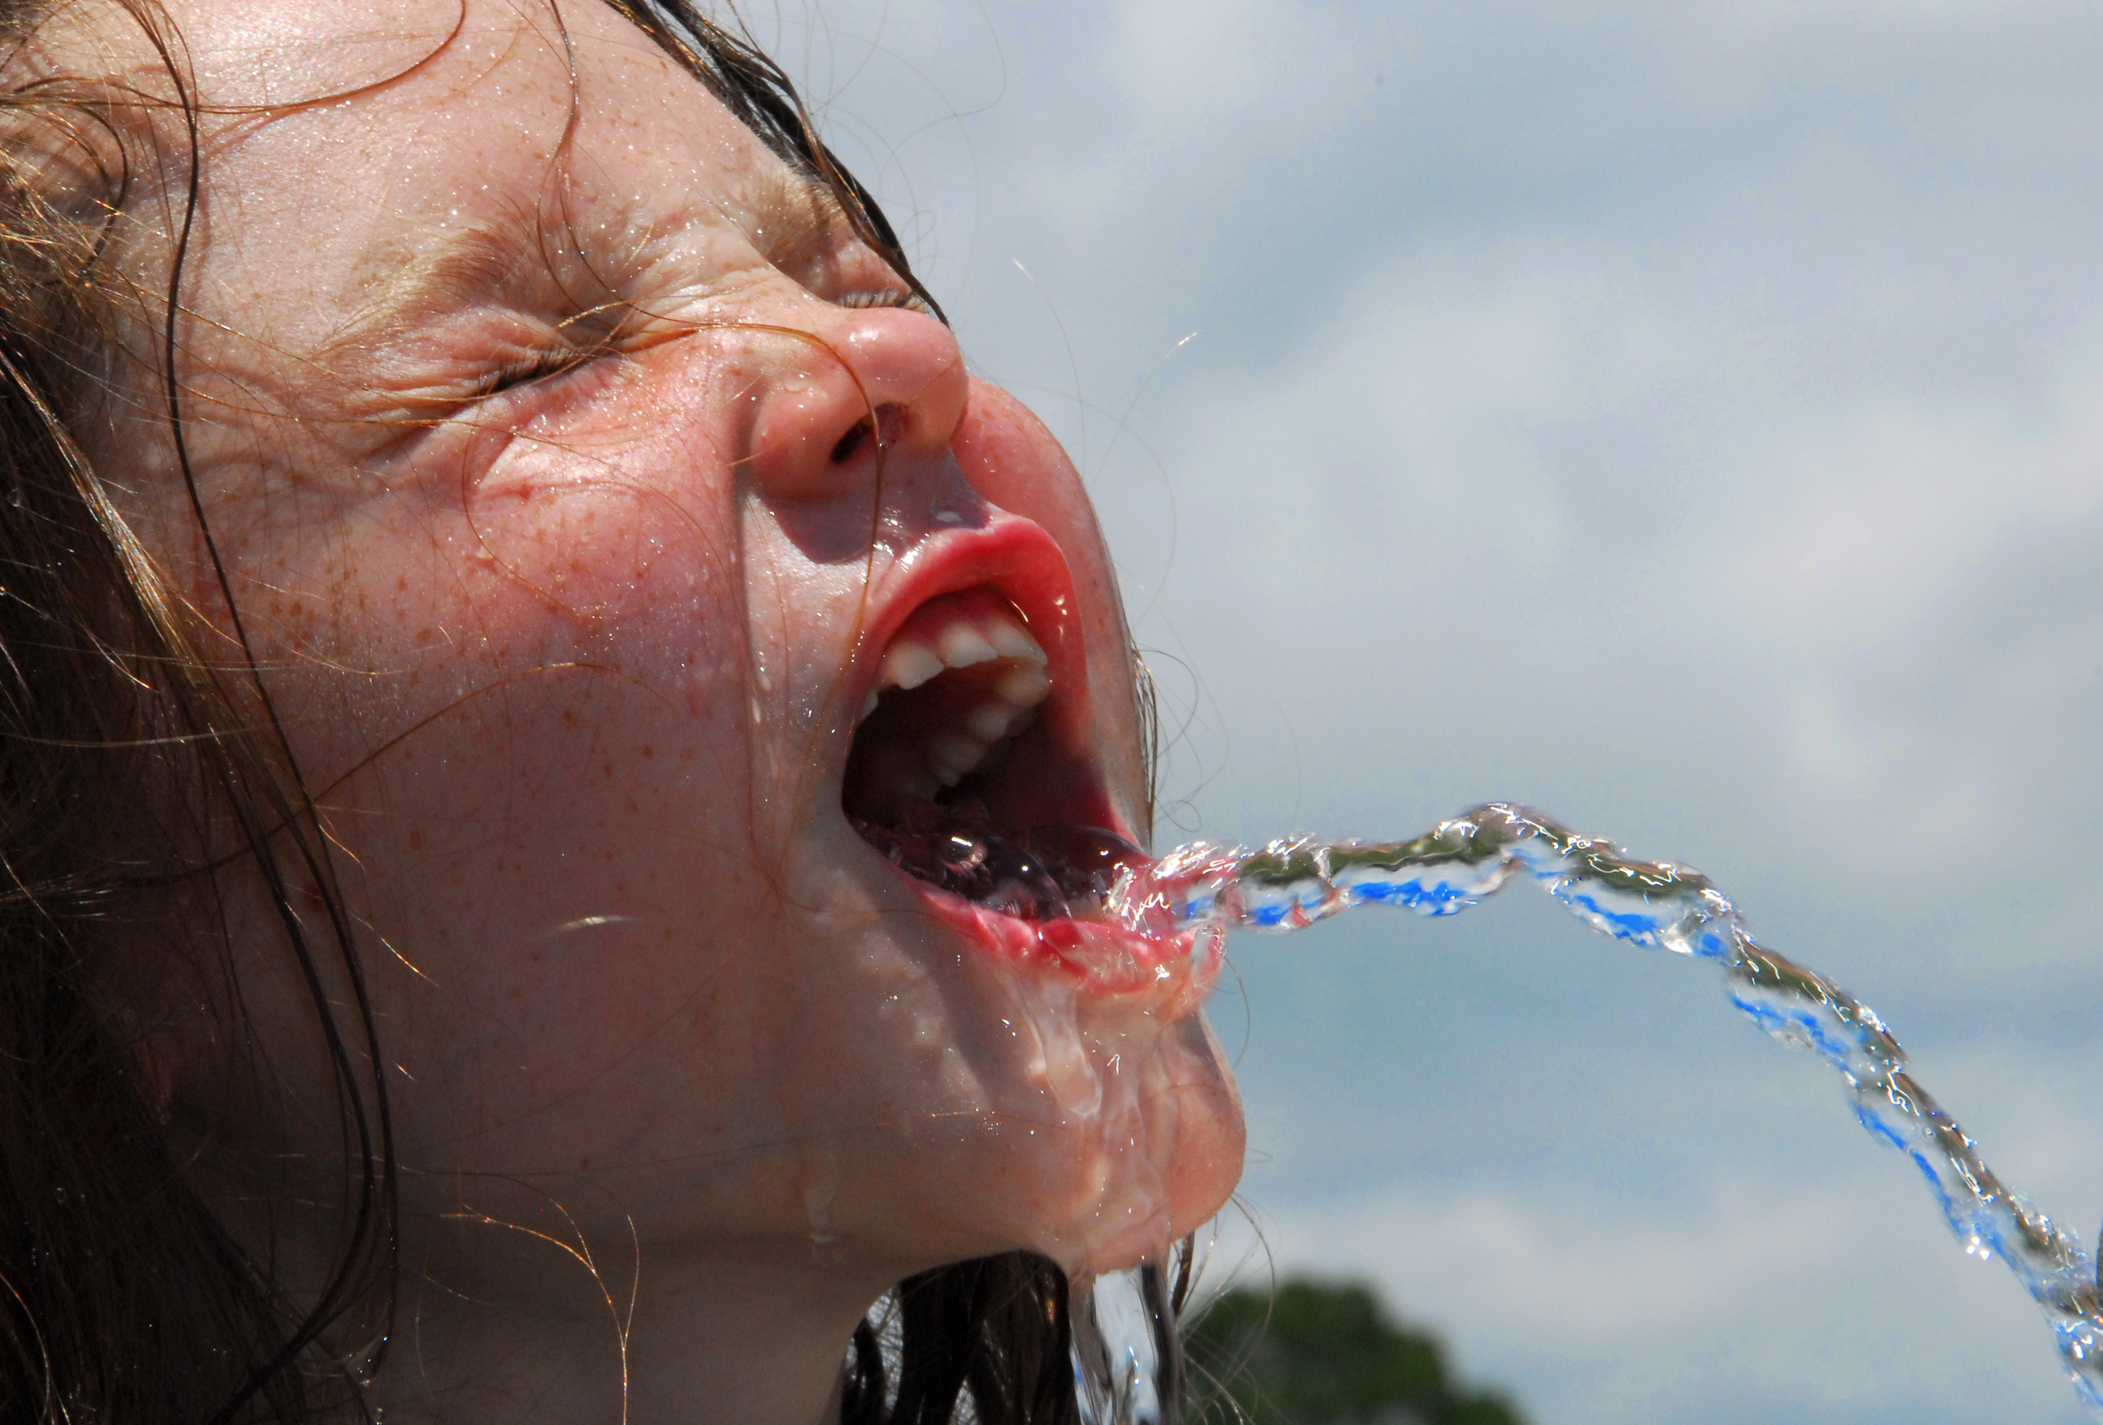 Little girl with eyes closed and a stream of water if coming out of her mouth